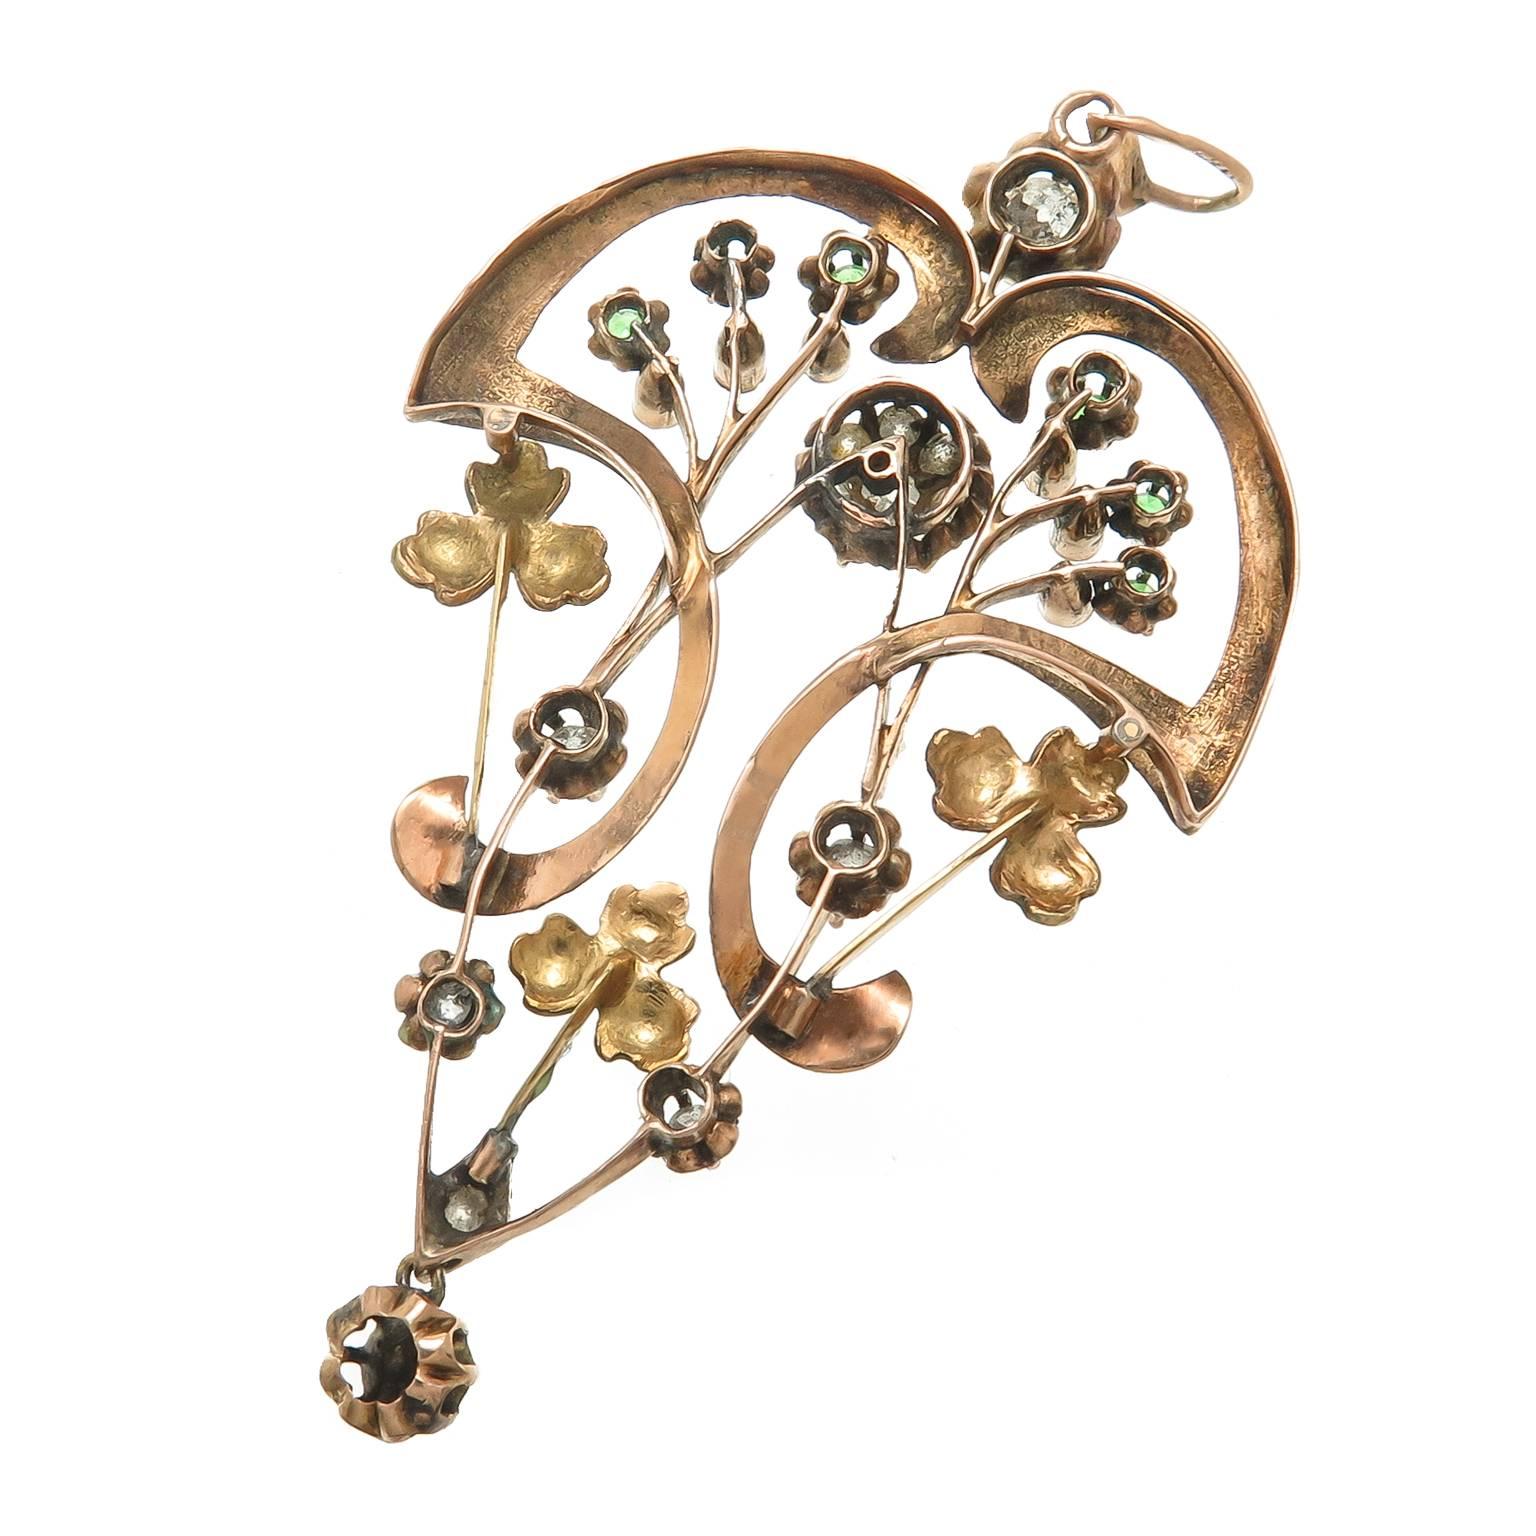 Circa 1910 14K Yellow Gold Russian pendant set with Old Mine Cut Diamonds, Green Demantoid Garnets and further decorated with Enamel Flowers. Measuring 2 3/4 inch in length and 1 5/8 inch wide. Having City stamps for Moscow and also having partially